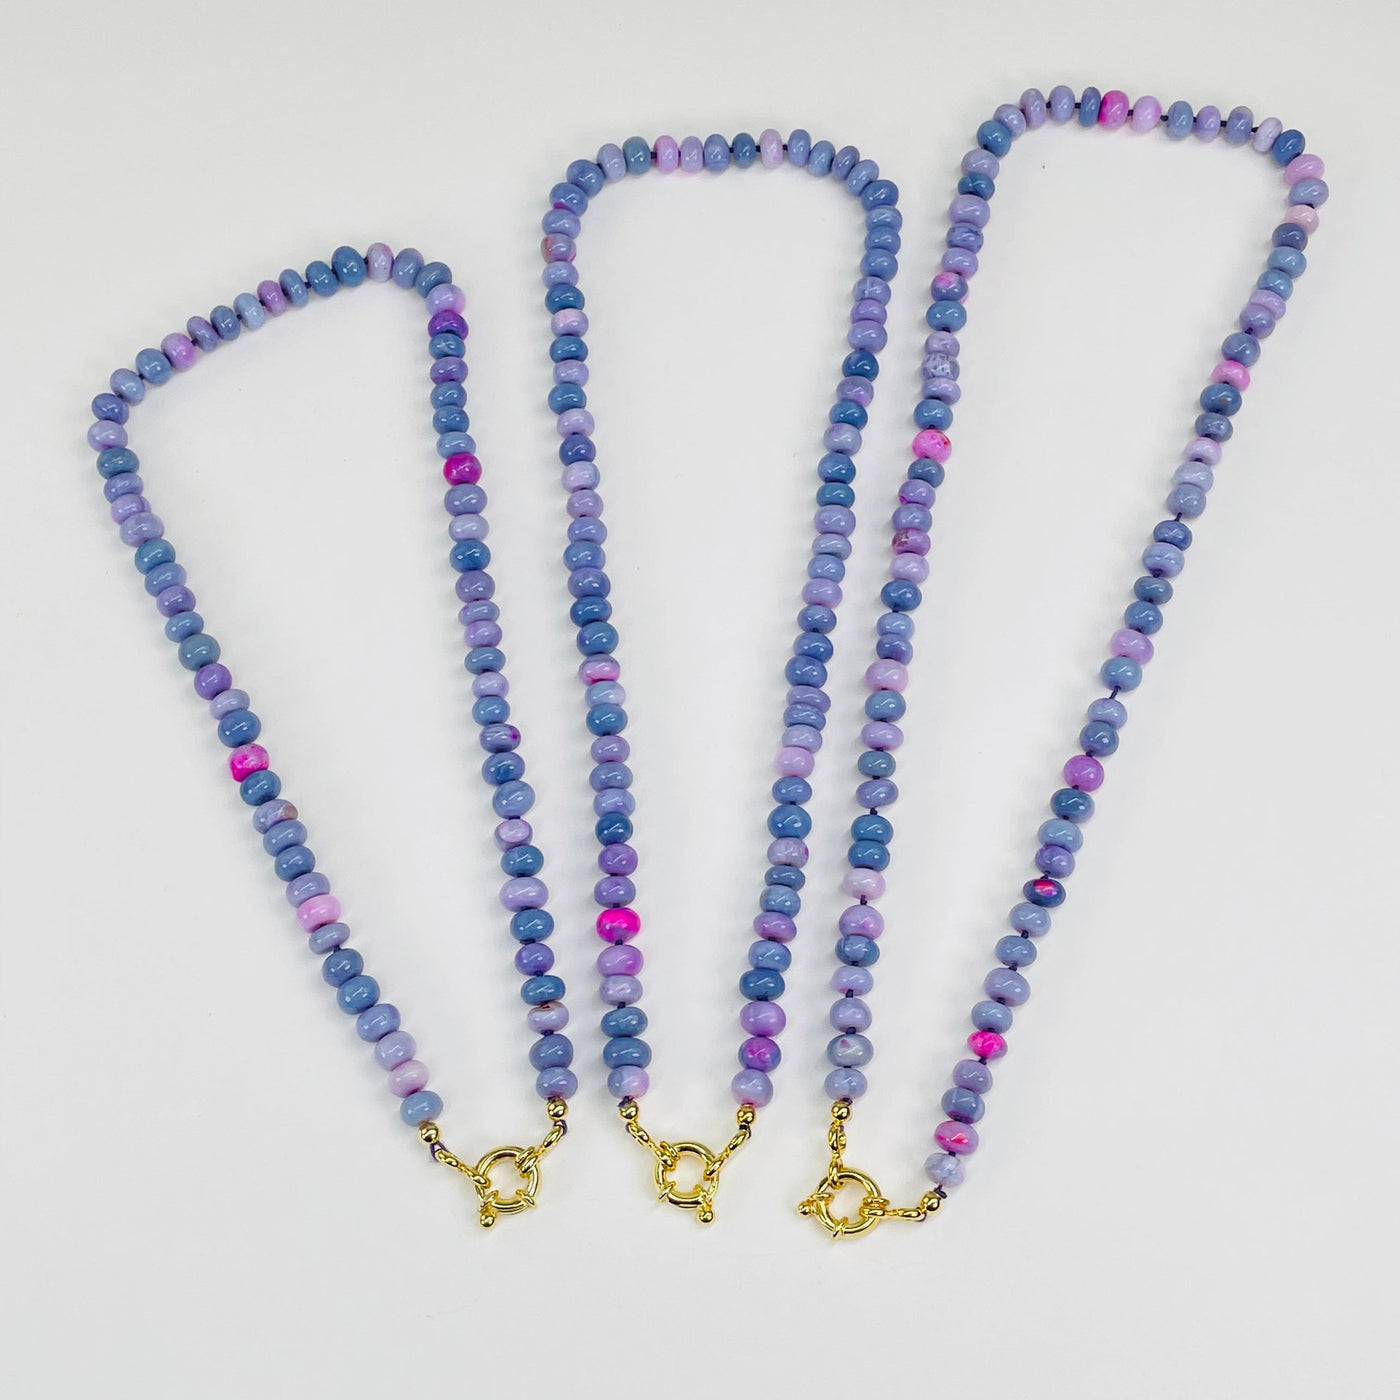 necklaces displayed to show the differences in the color shades 